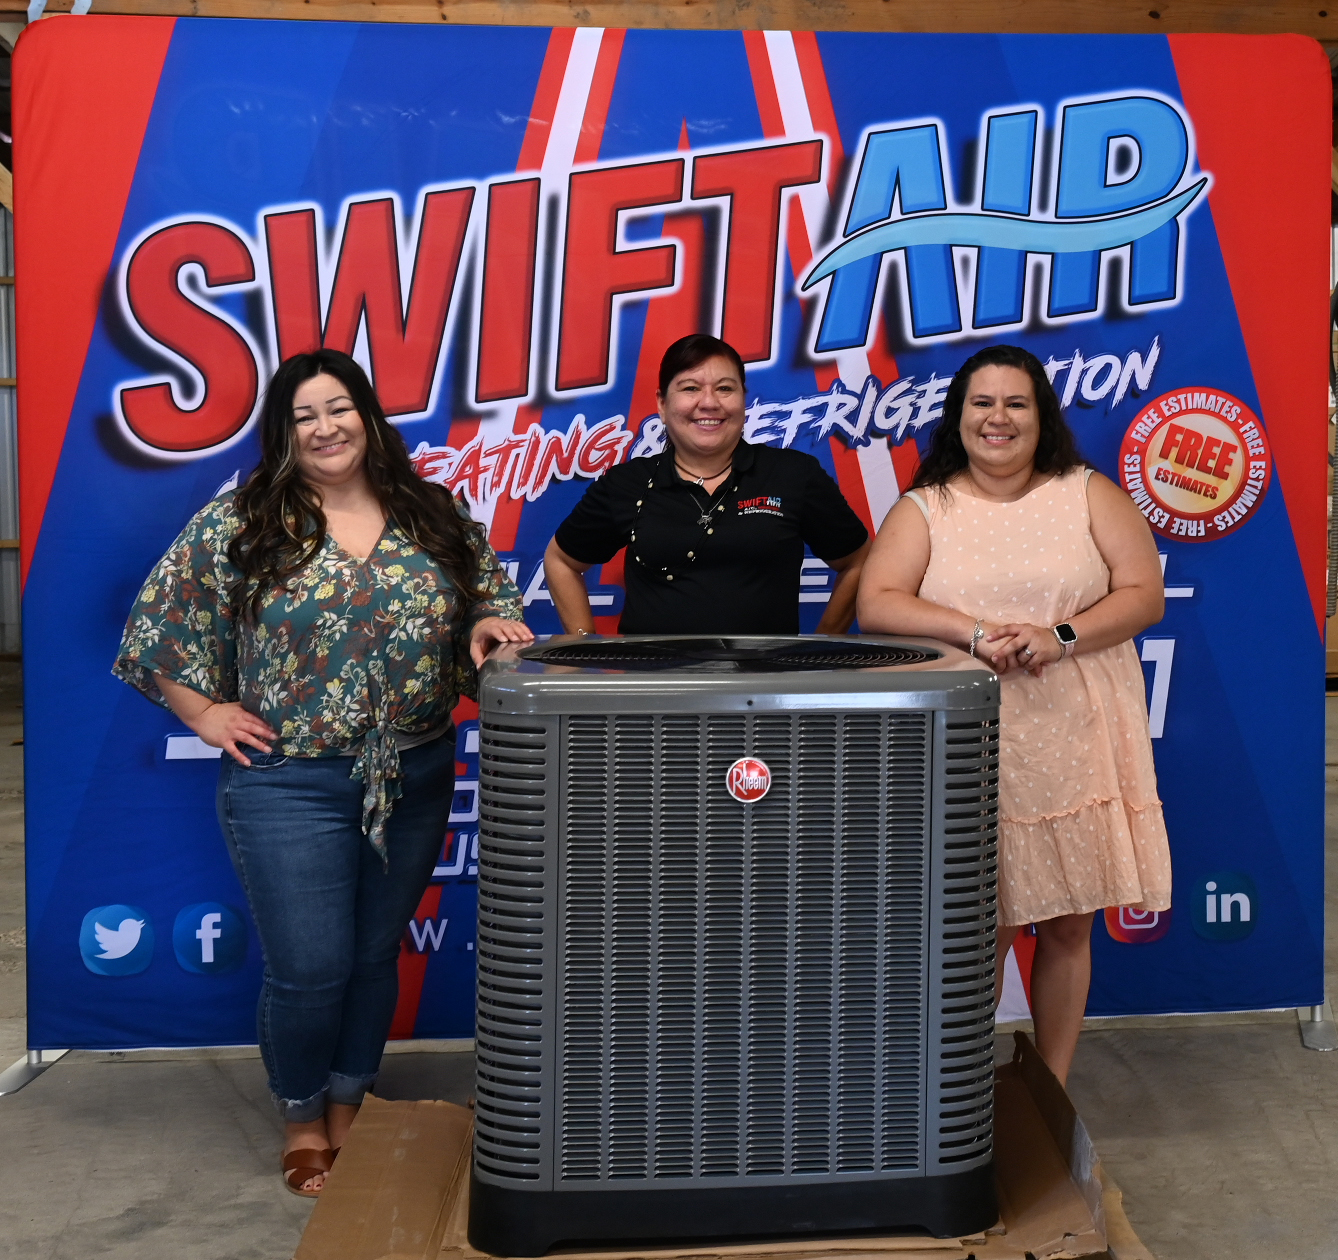 Swift Air is an air conditioning company in Corpus Christi, Texas that services portable ac units, window units, ac compressors, ac installations, window units, and mini split air conditioners.